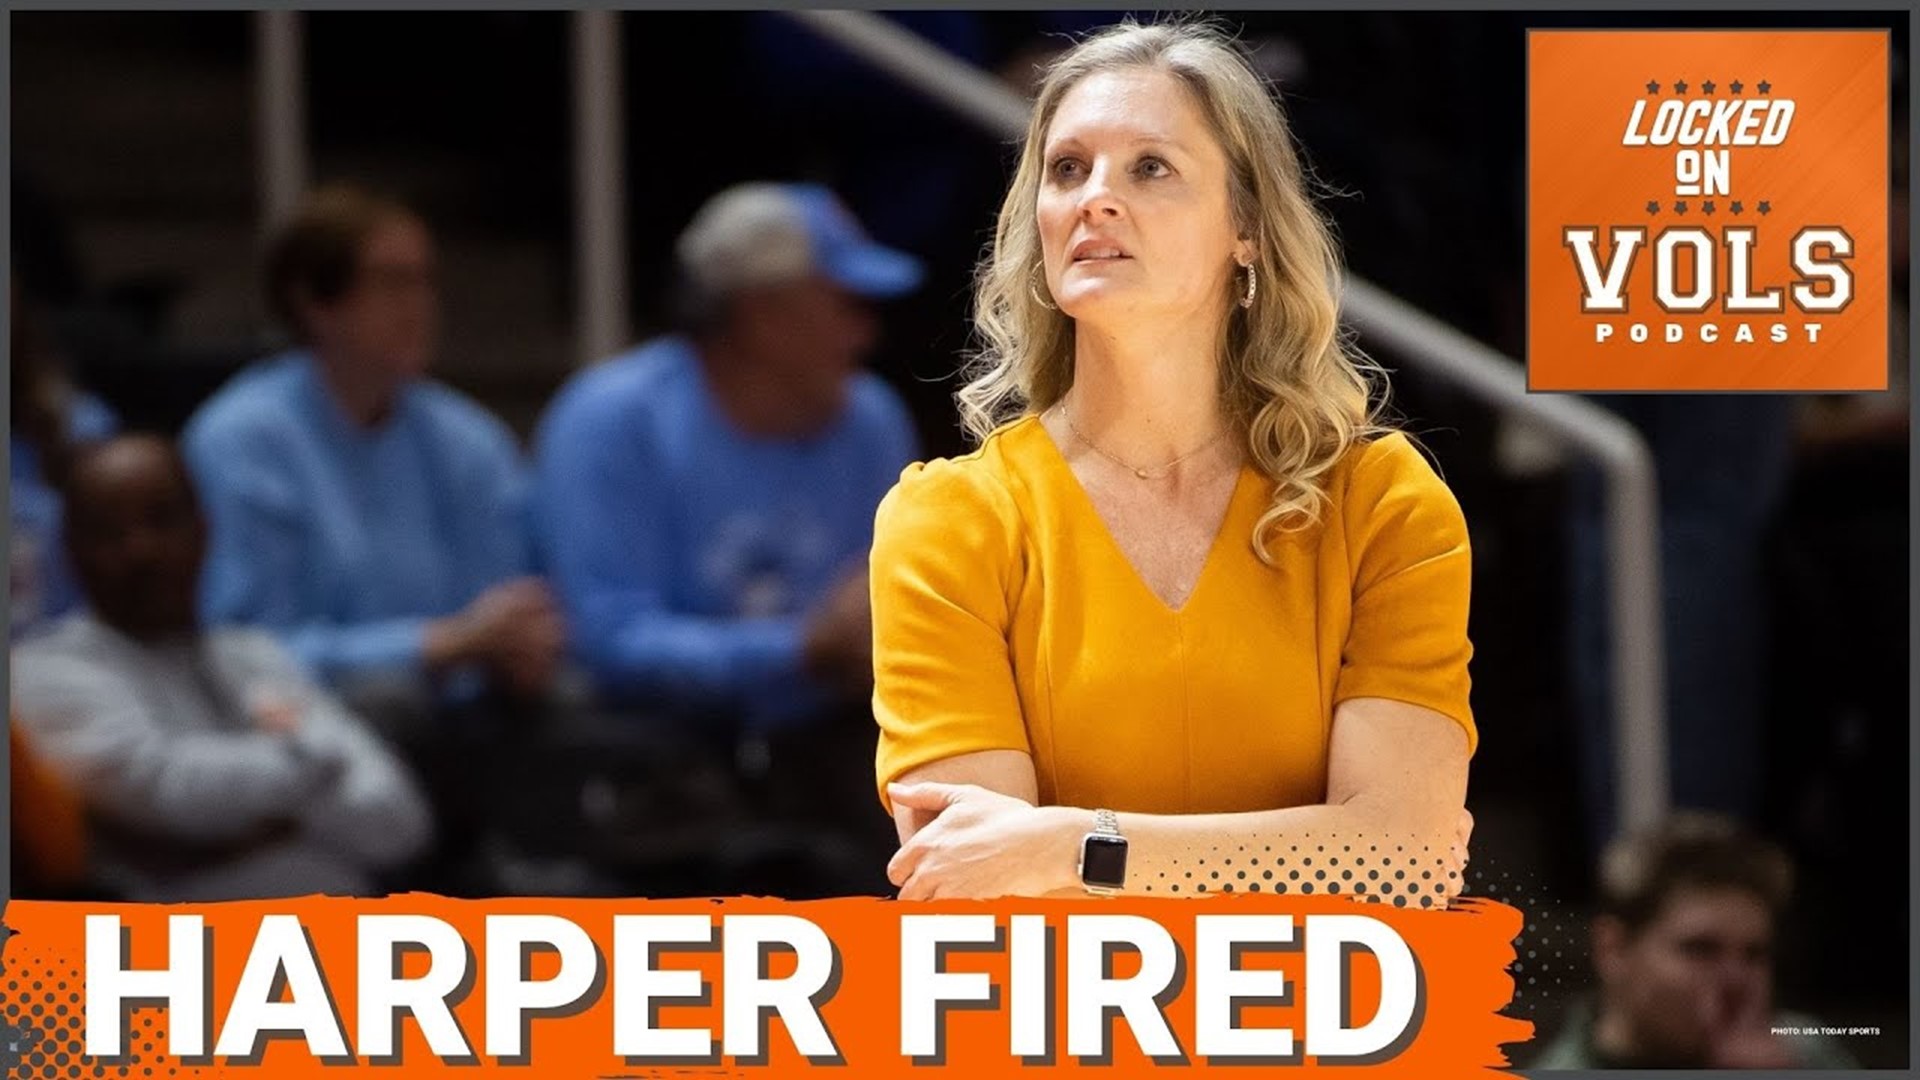 Tennessee AD Danny White Fires Lady Vols Head Coach Kellie Harper. Can the Program Return to Glory?